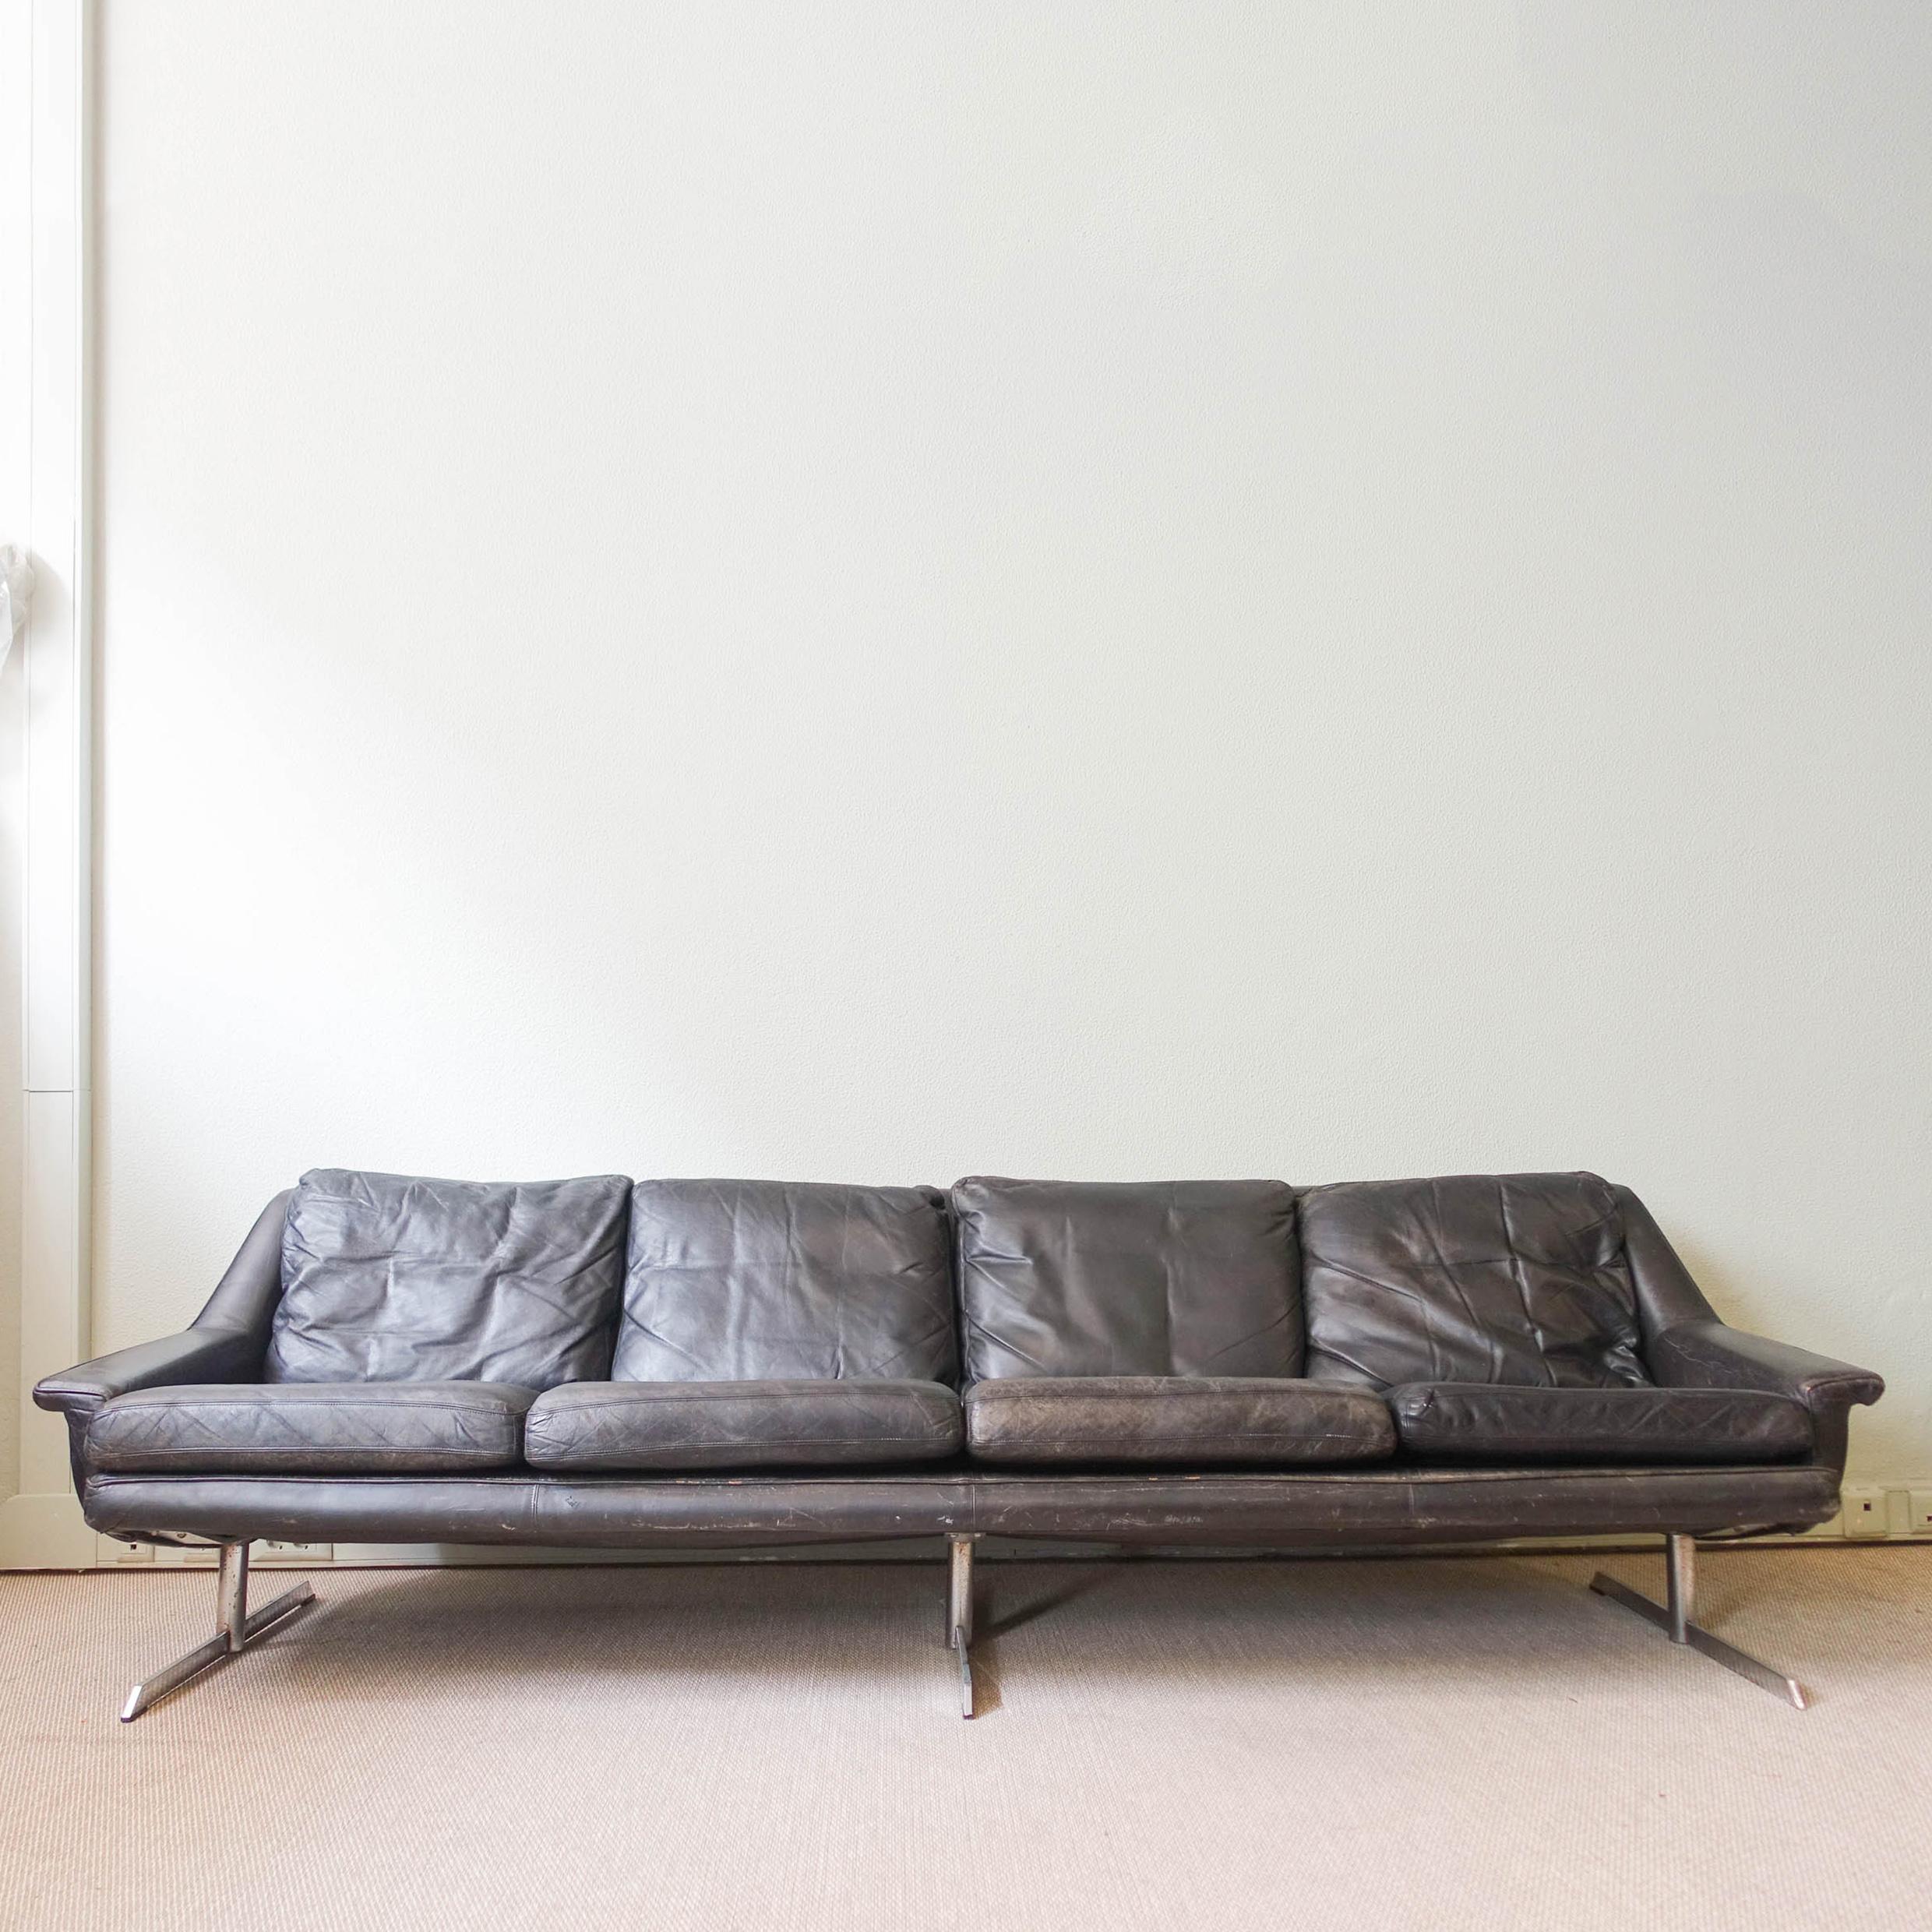 A model 802 designed by Werner Langenfeld and produced by ESA Møbelværk in Denmark, during the 1960's. It is reupholstered in the original black leather, that has some cracks in one of the cushions, and it's a bit discolored. It has three chrome